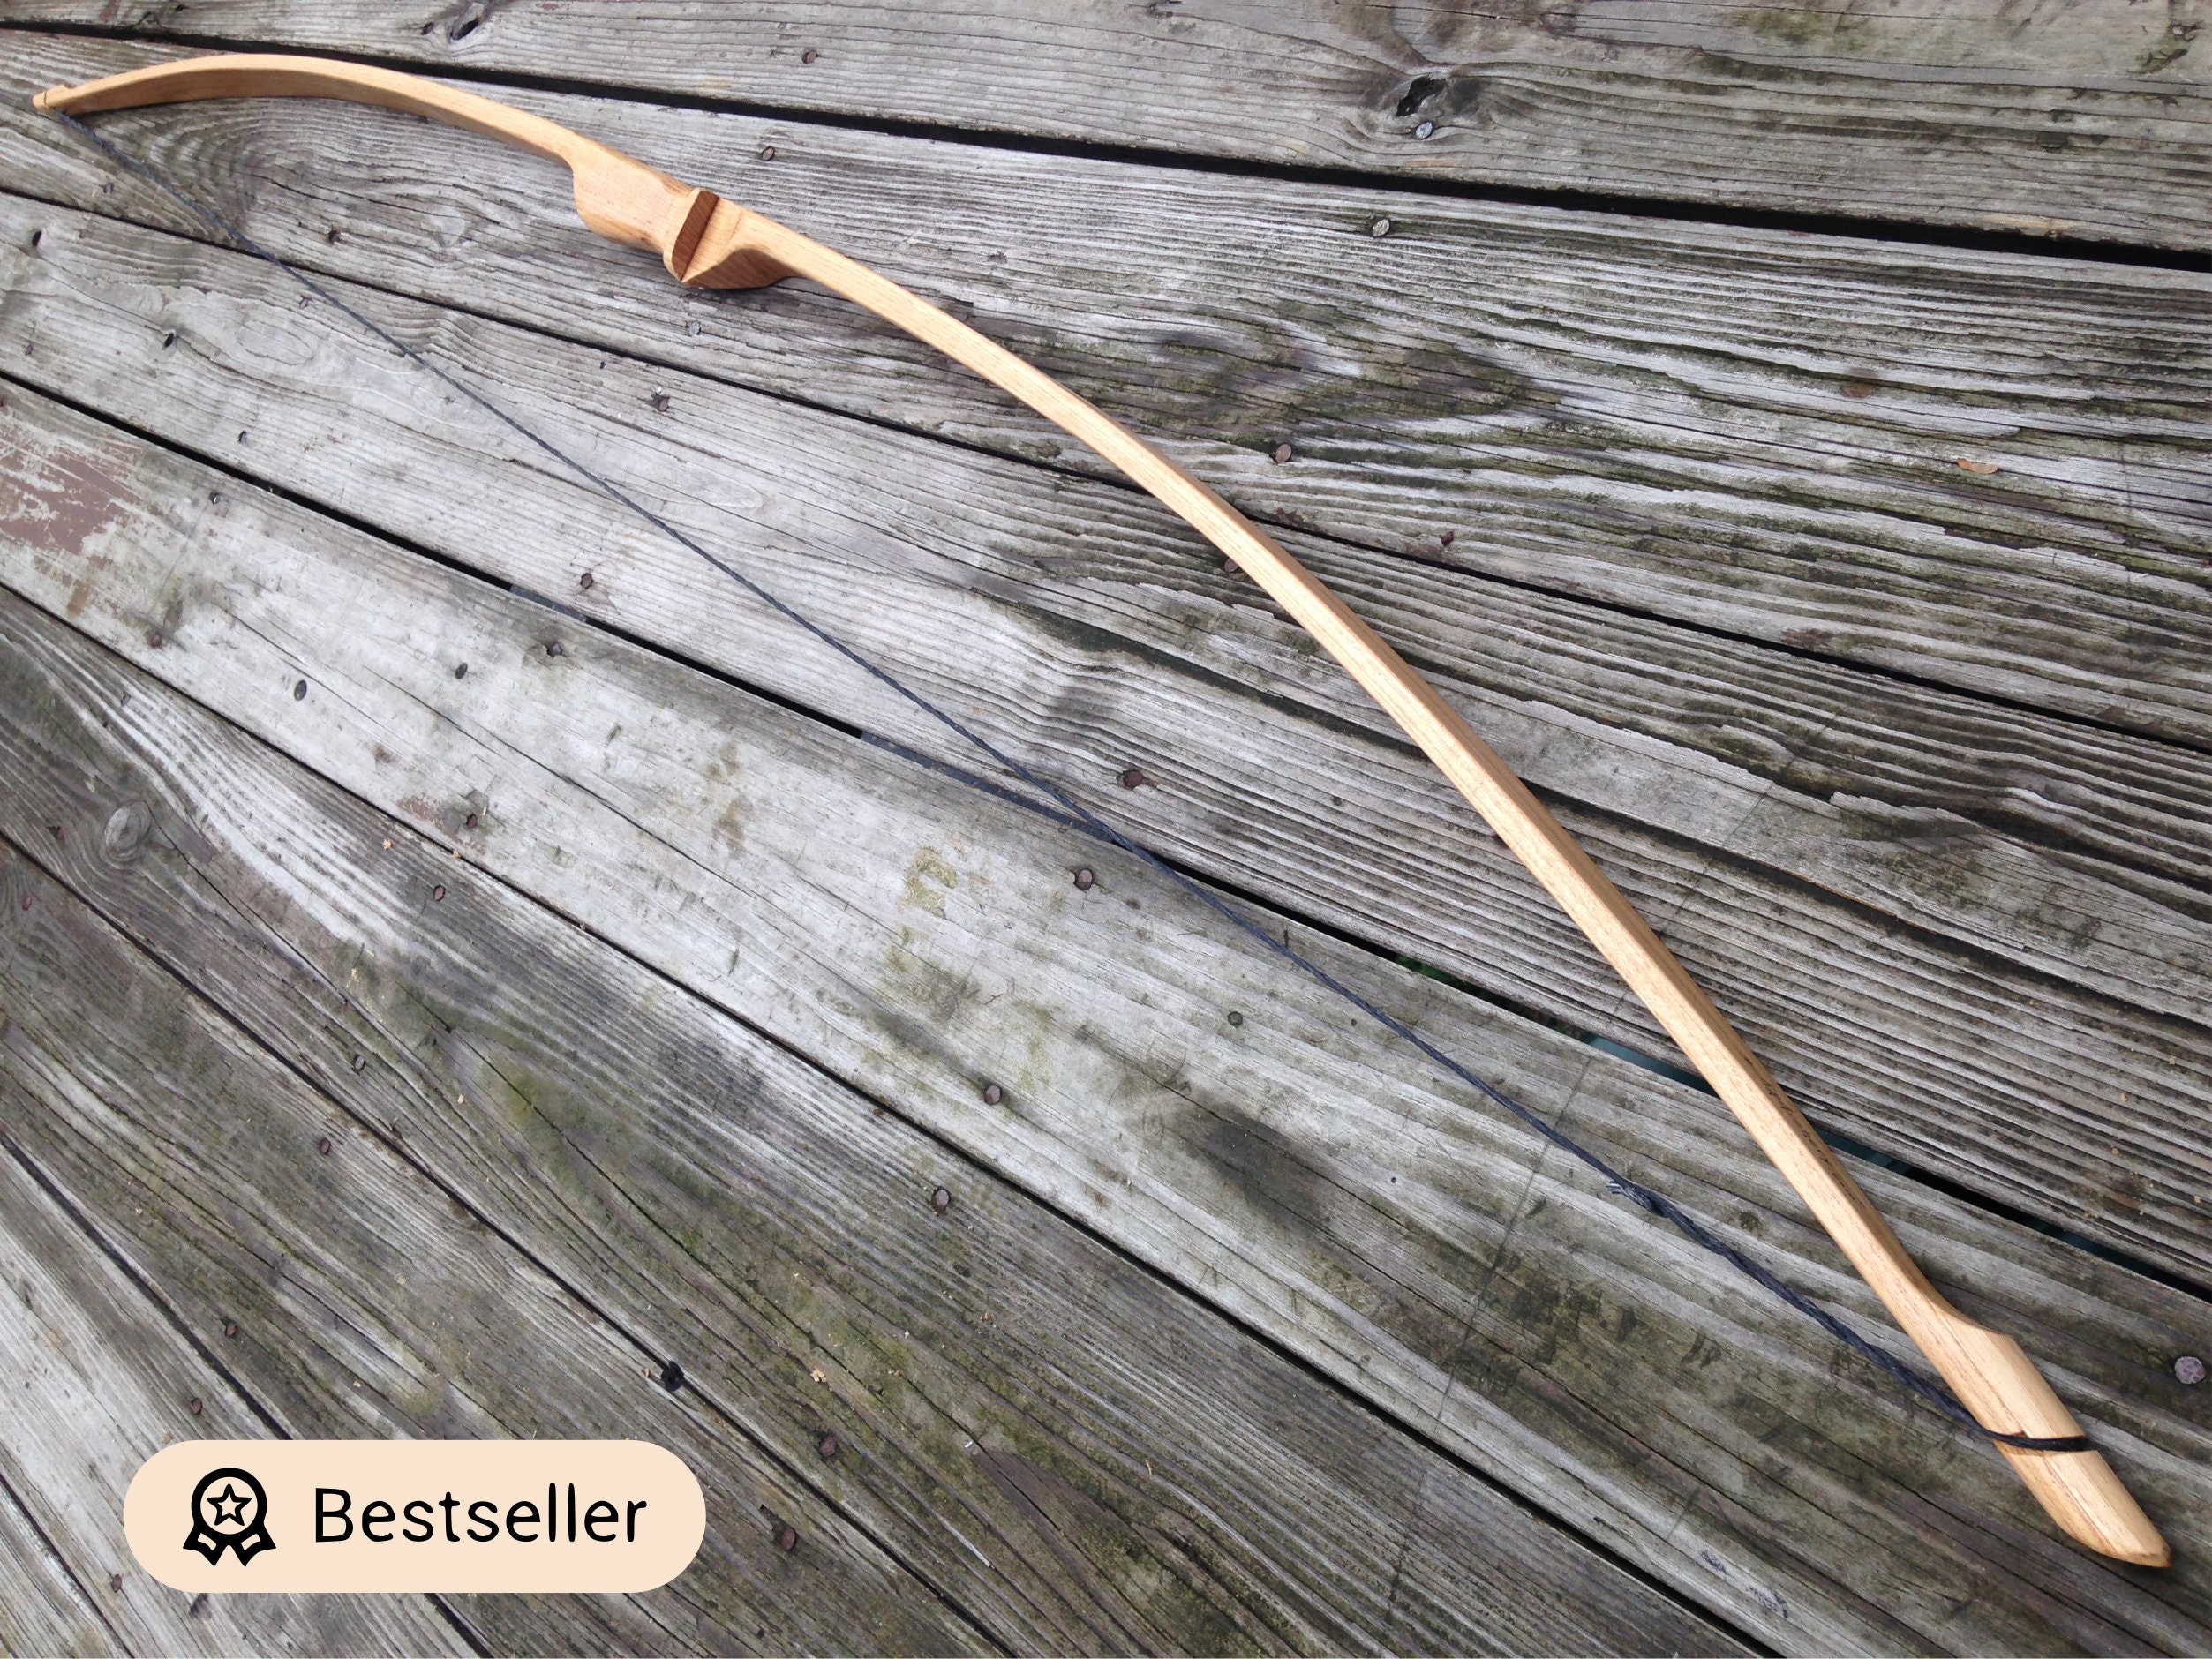 wooden shafts traditional archery hunting bow